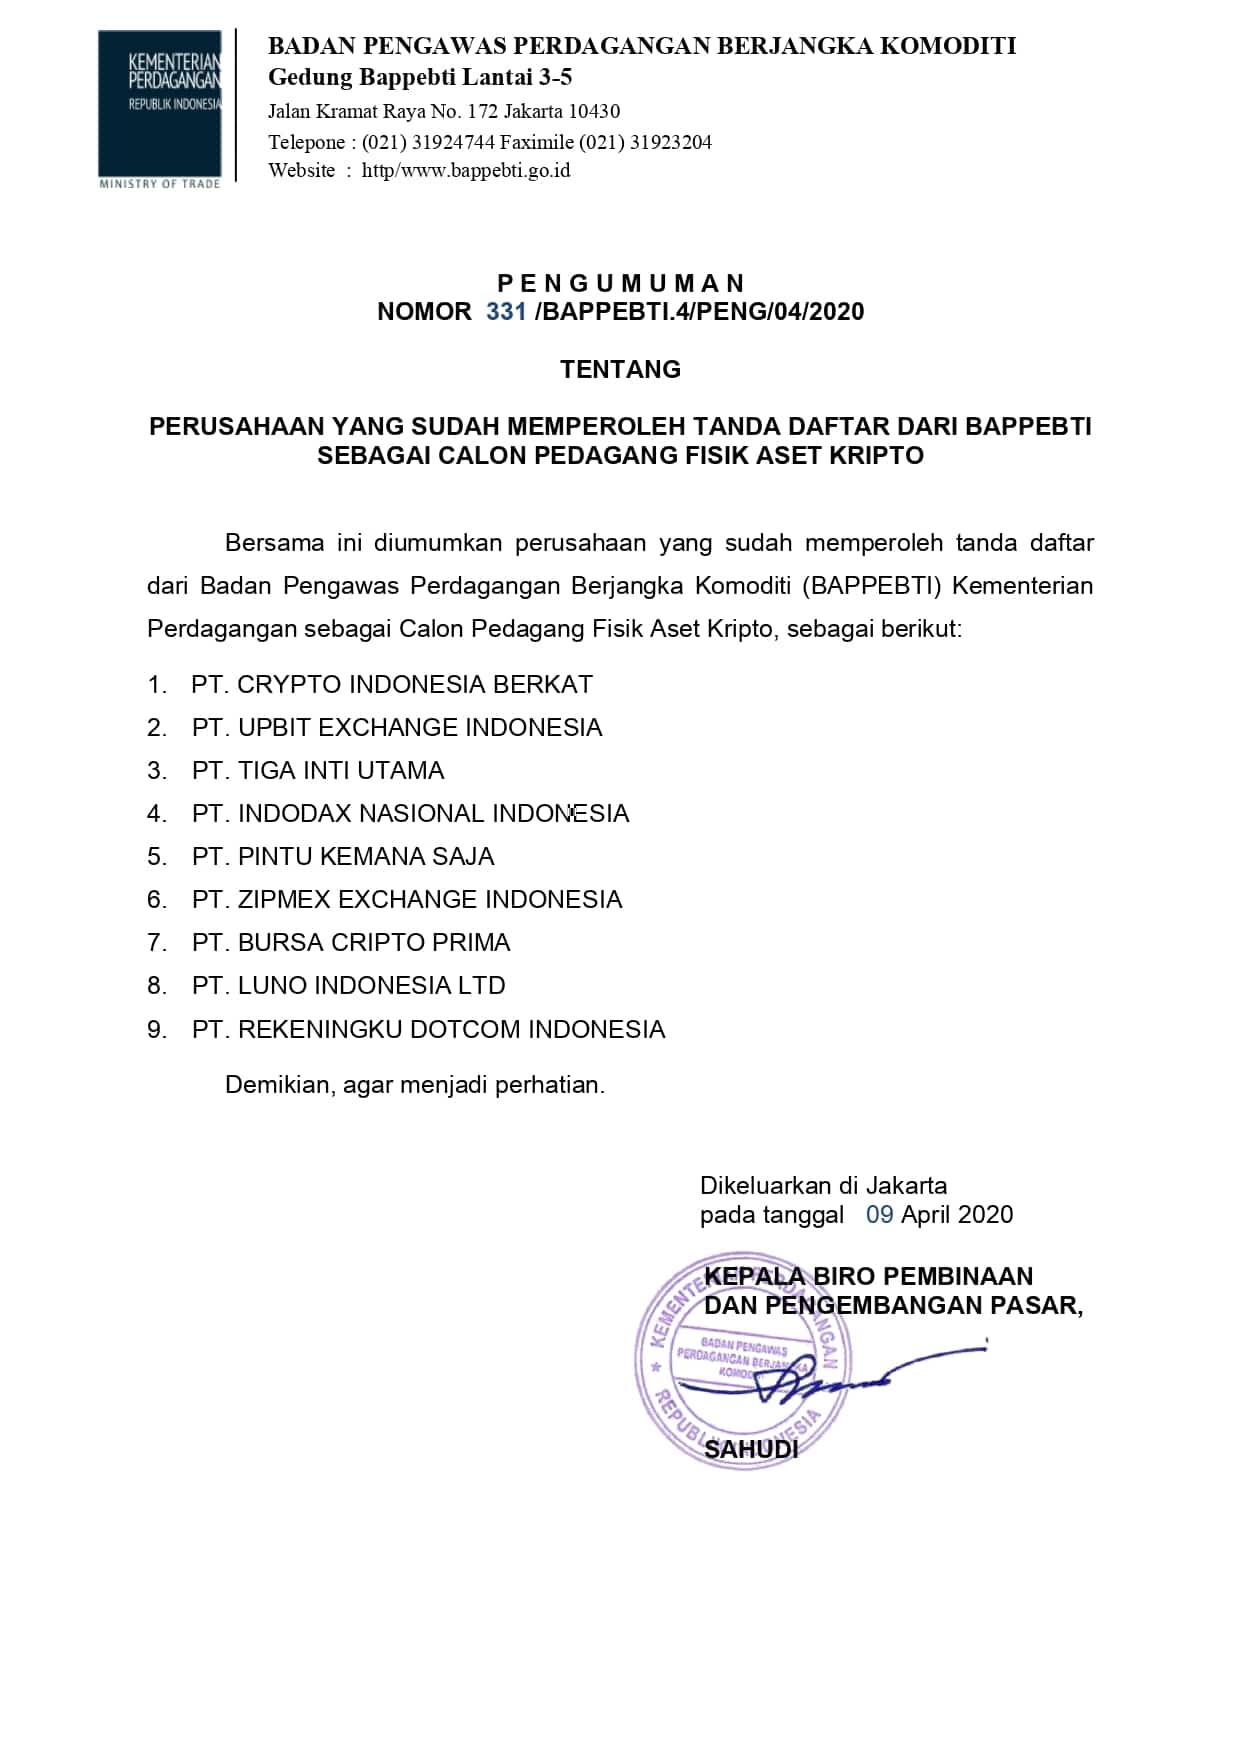 Is Crypto Legal in Indonesia?